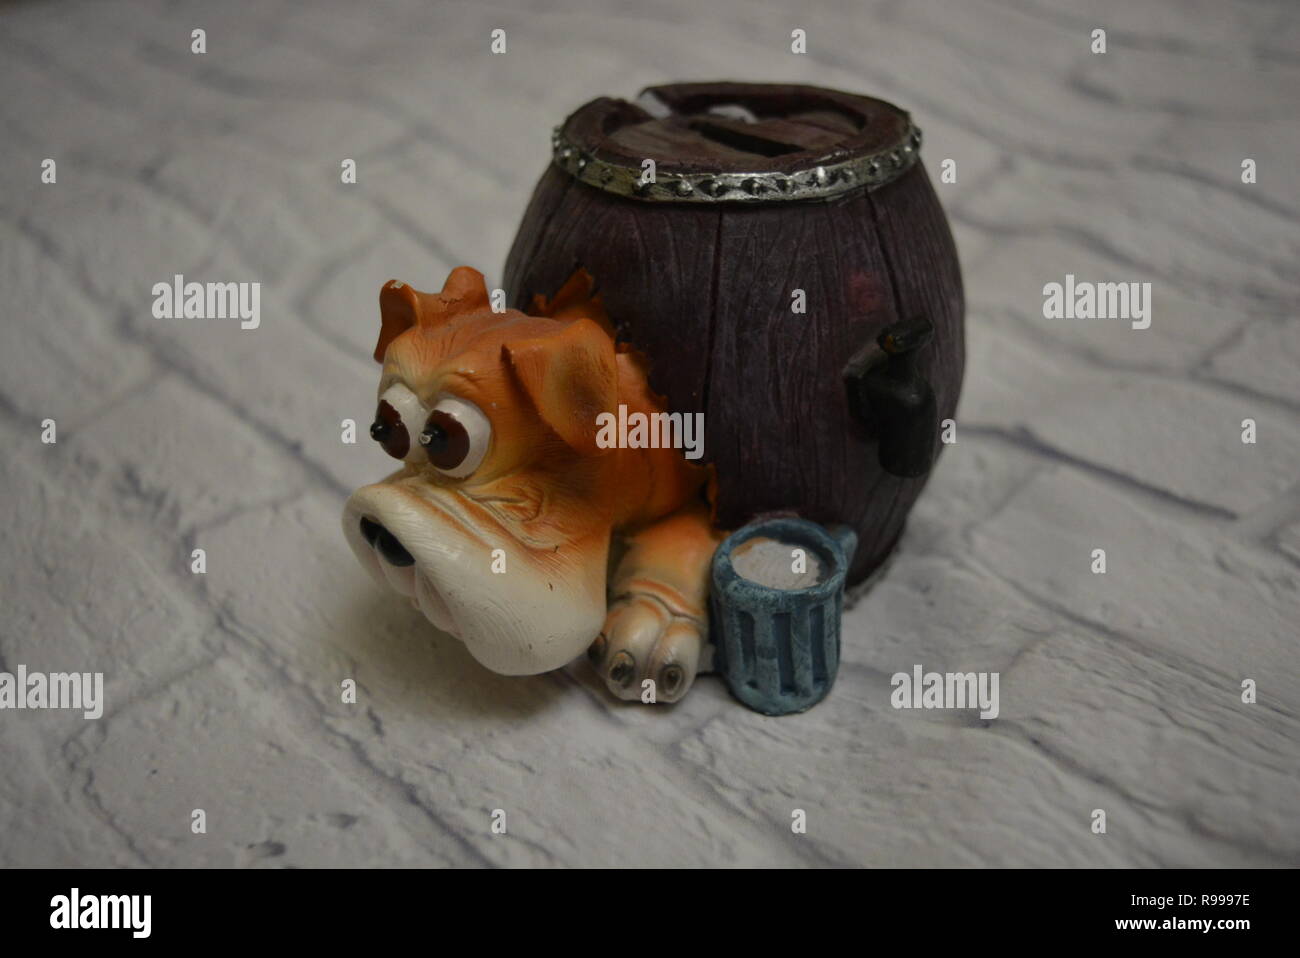 Ceramic drip tray in the form of a beer barrel with a dog head and a blue glass of beer next to it against the background of a white brick wall. Stock Photo